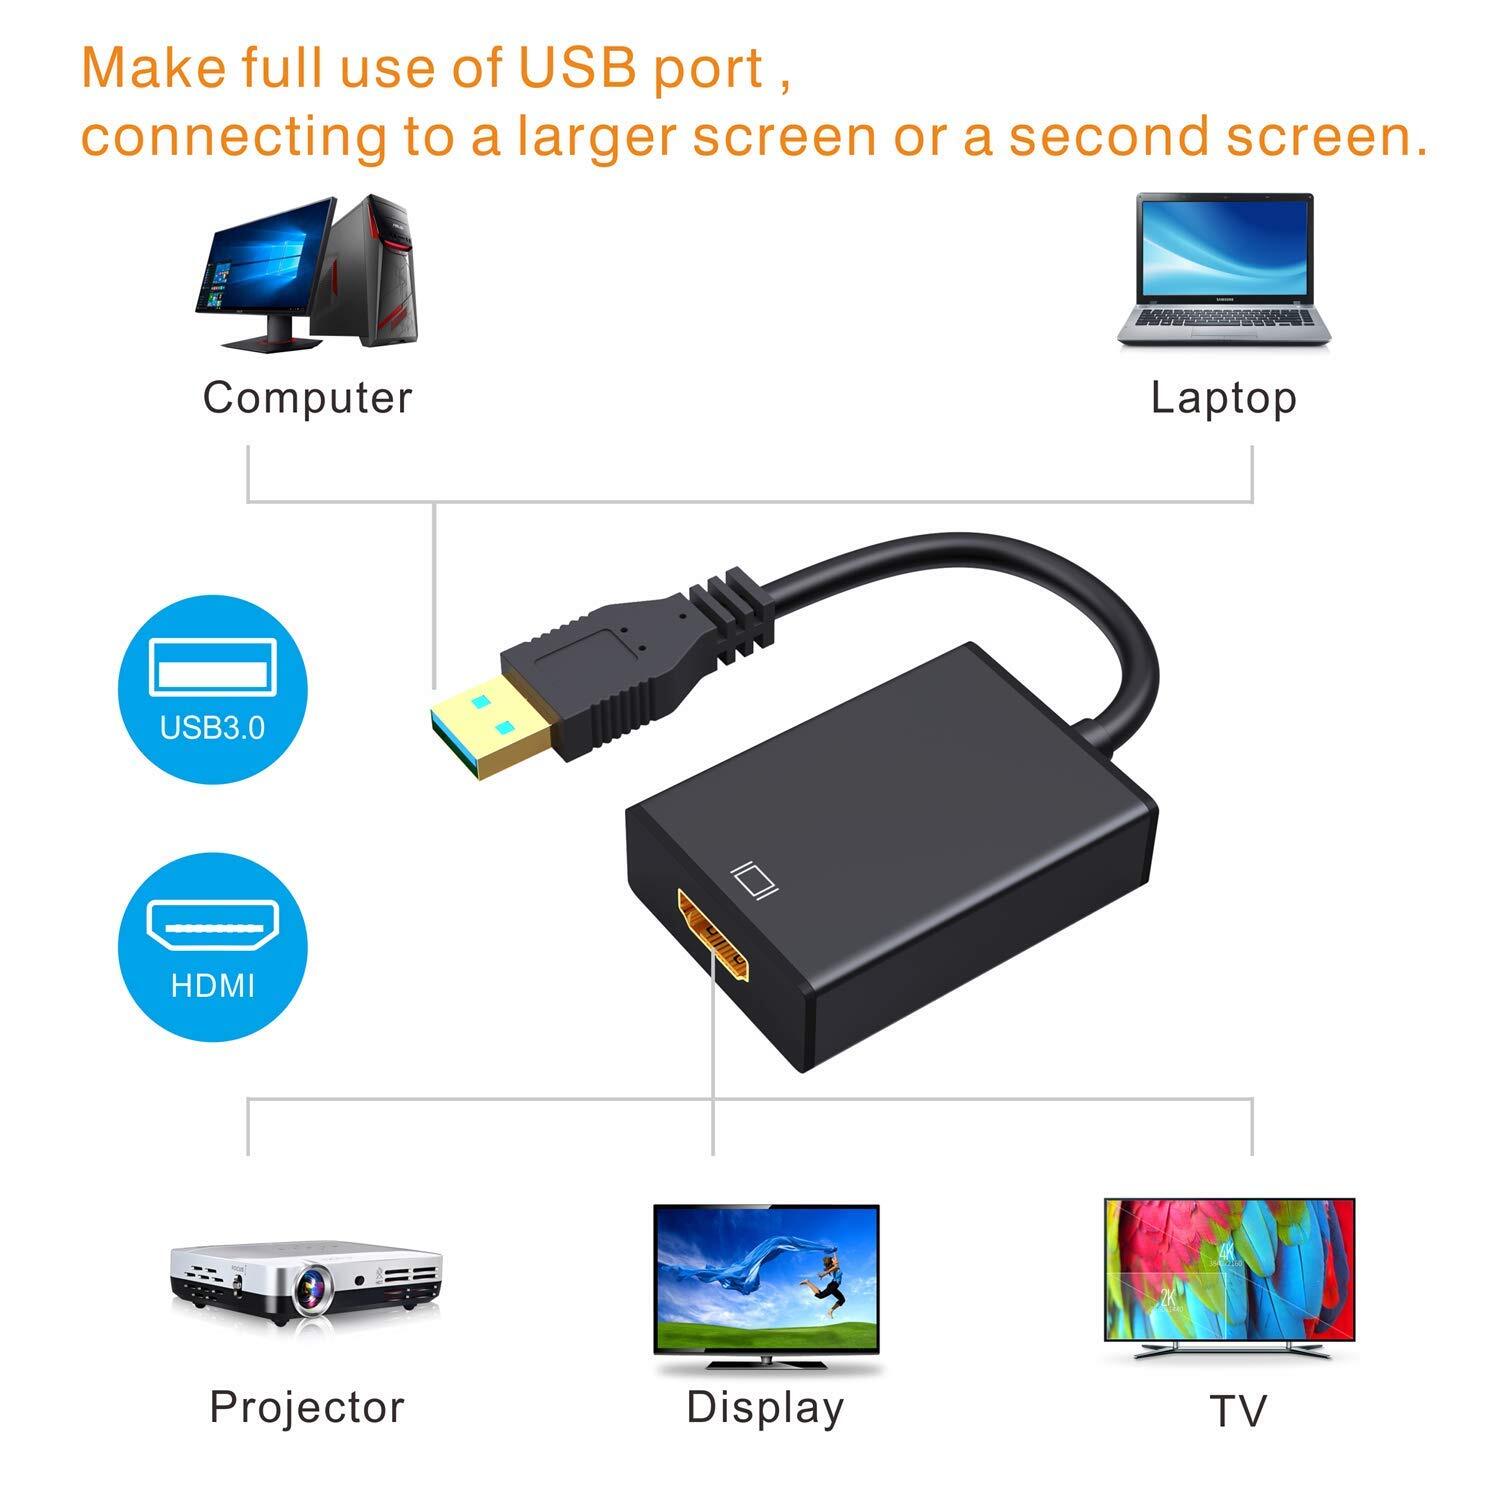 USB to HDMI Adapter Ucaca USB-3.0 to HDMI Cable Convertor with HD 1080P Multiple Monitors for PC Laptop to HDTV Projector 